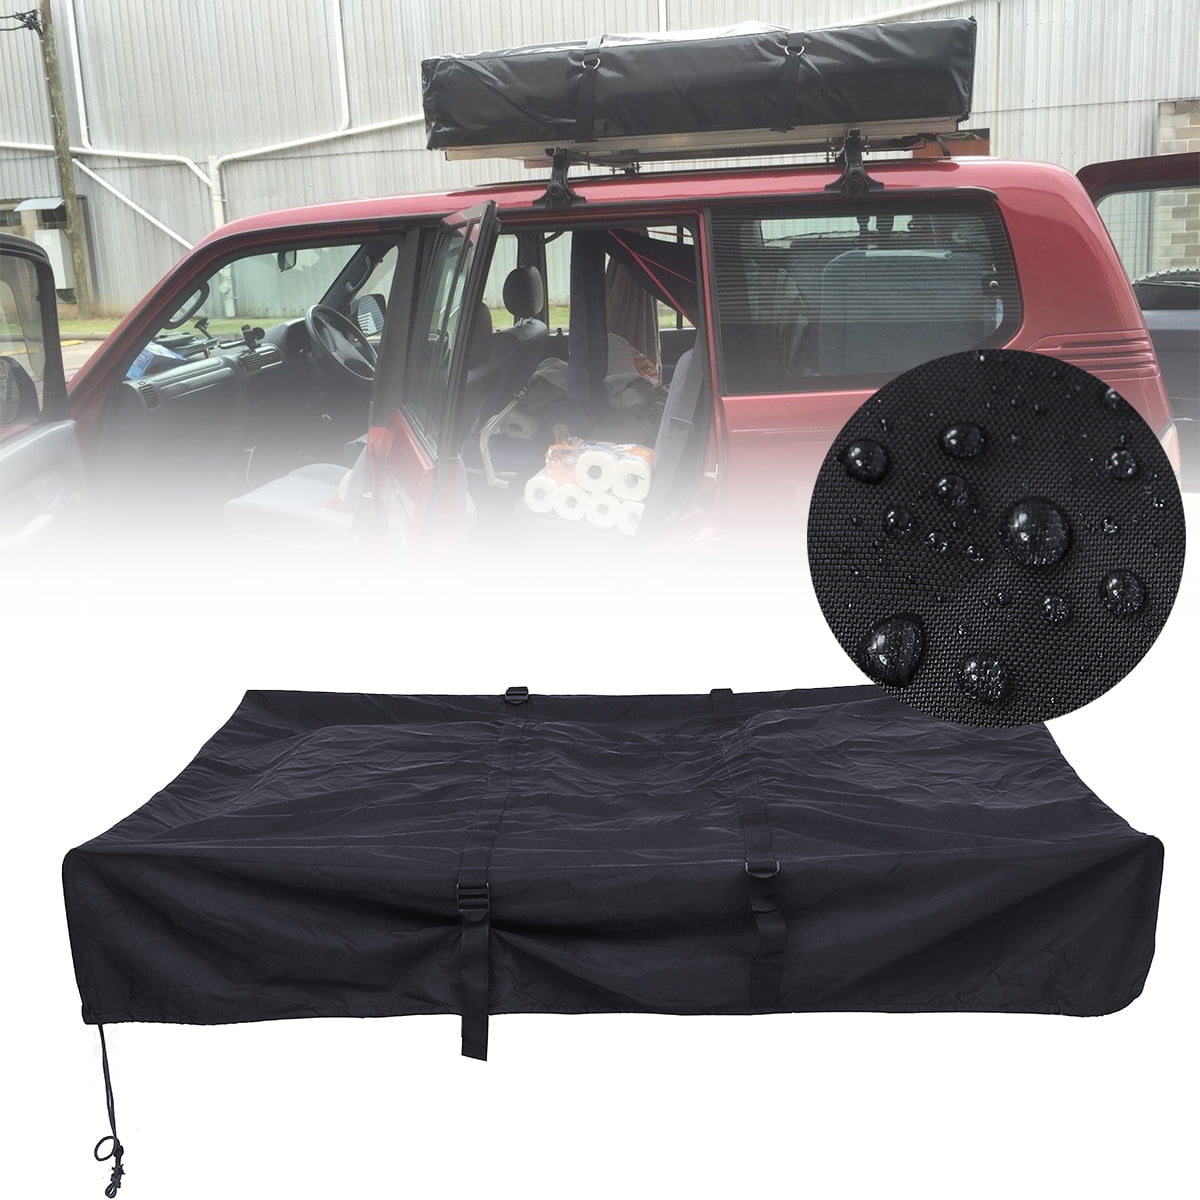 roof top tent travel cover